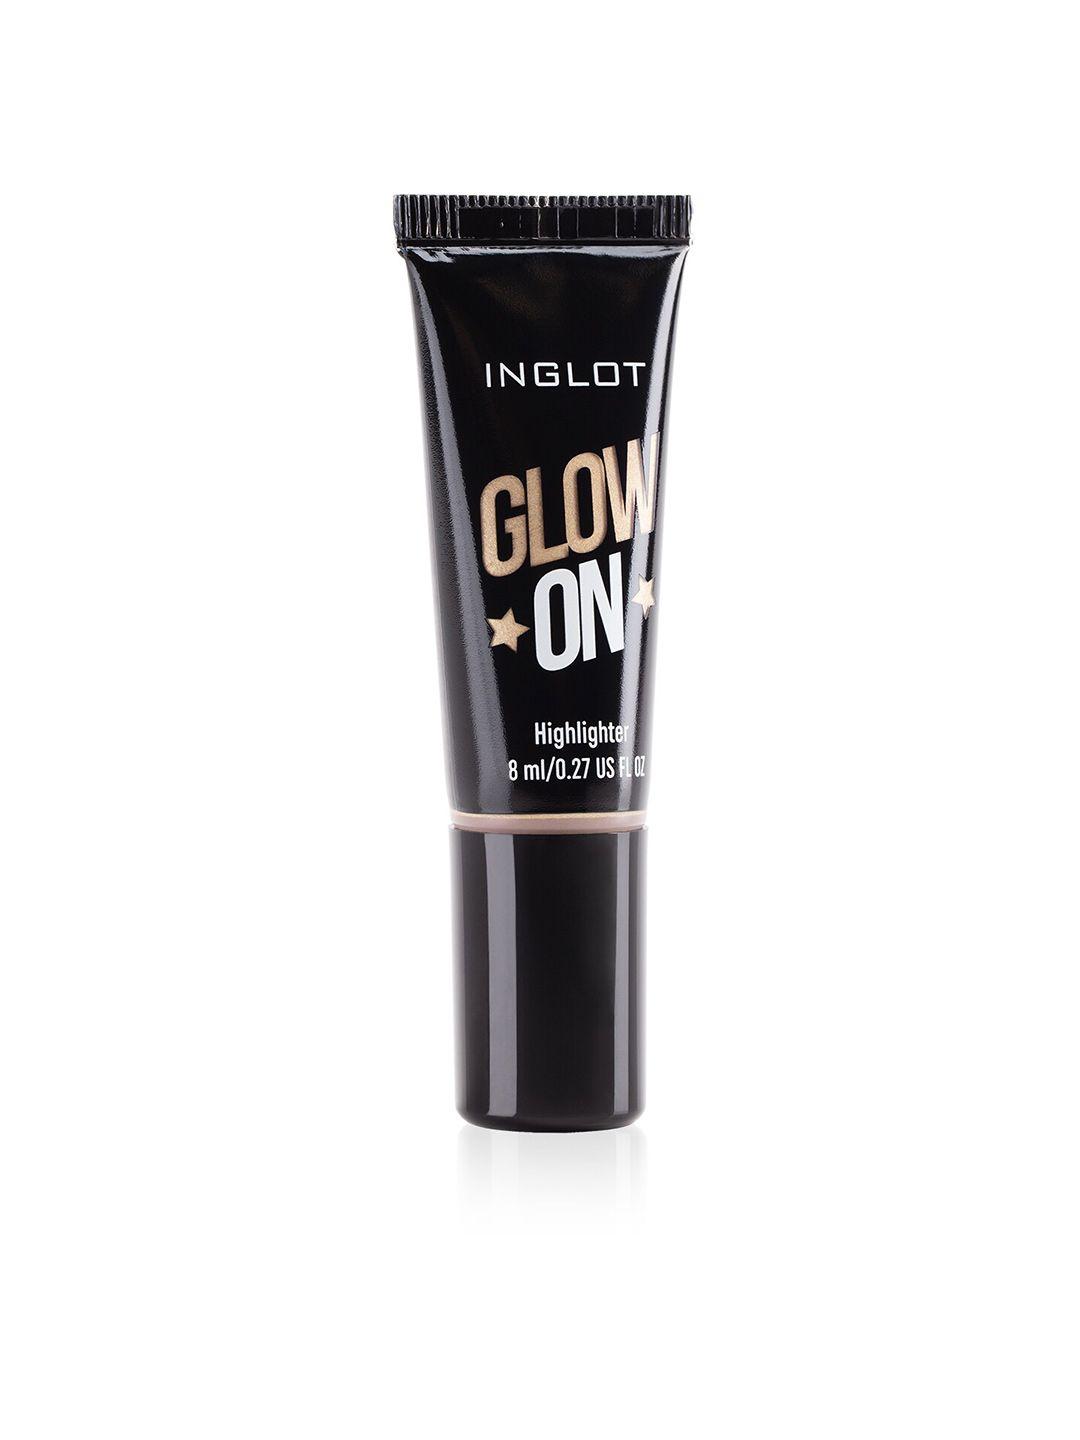 inglot glow on highlighter 8ml - pearl 23